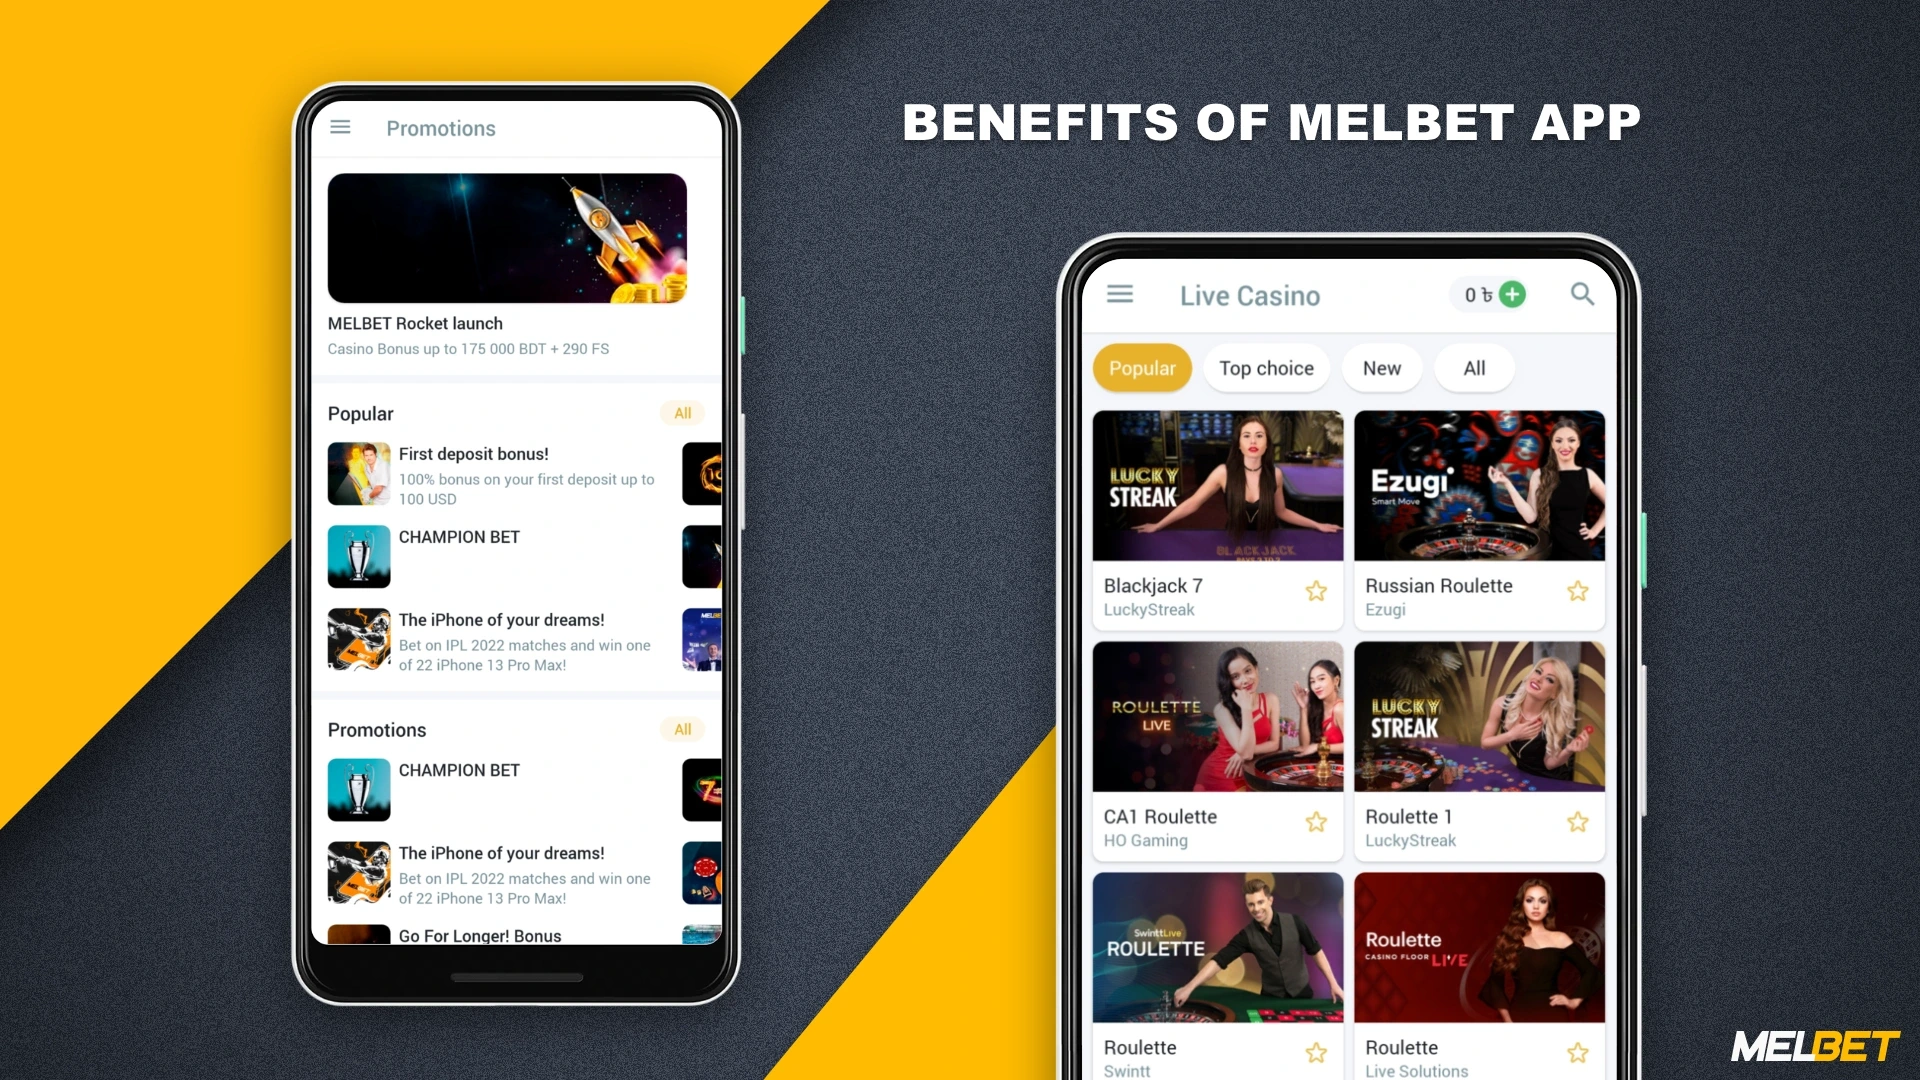 The main benefits of the Melbet app include the ability to play casino and sports betting, bonuses, in-app deposit and much more